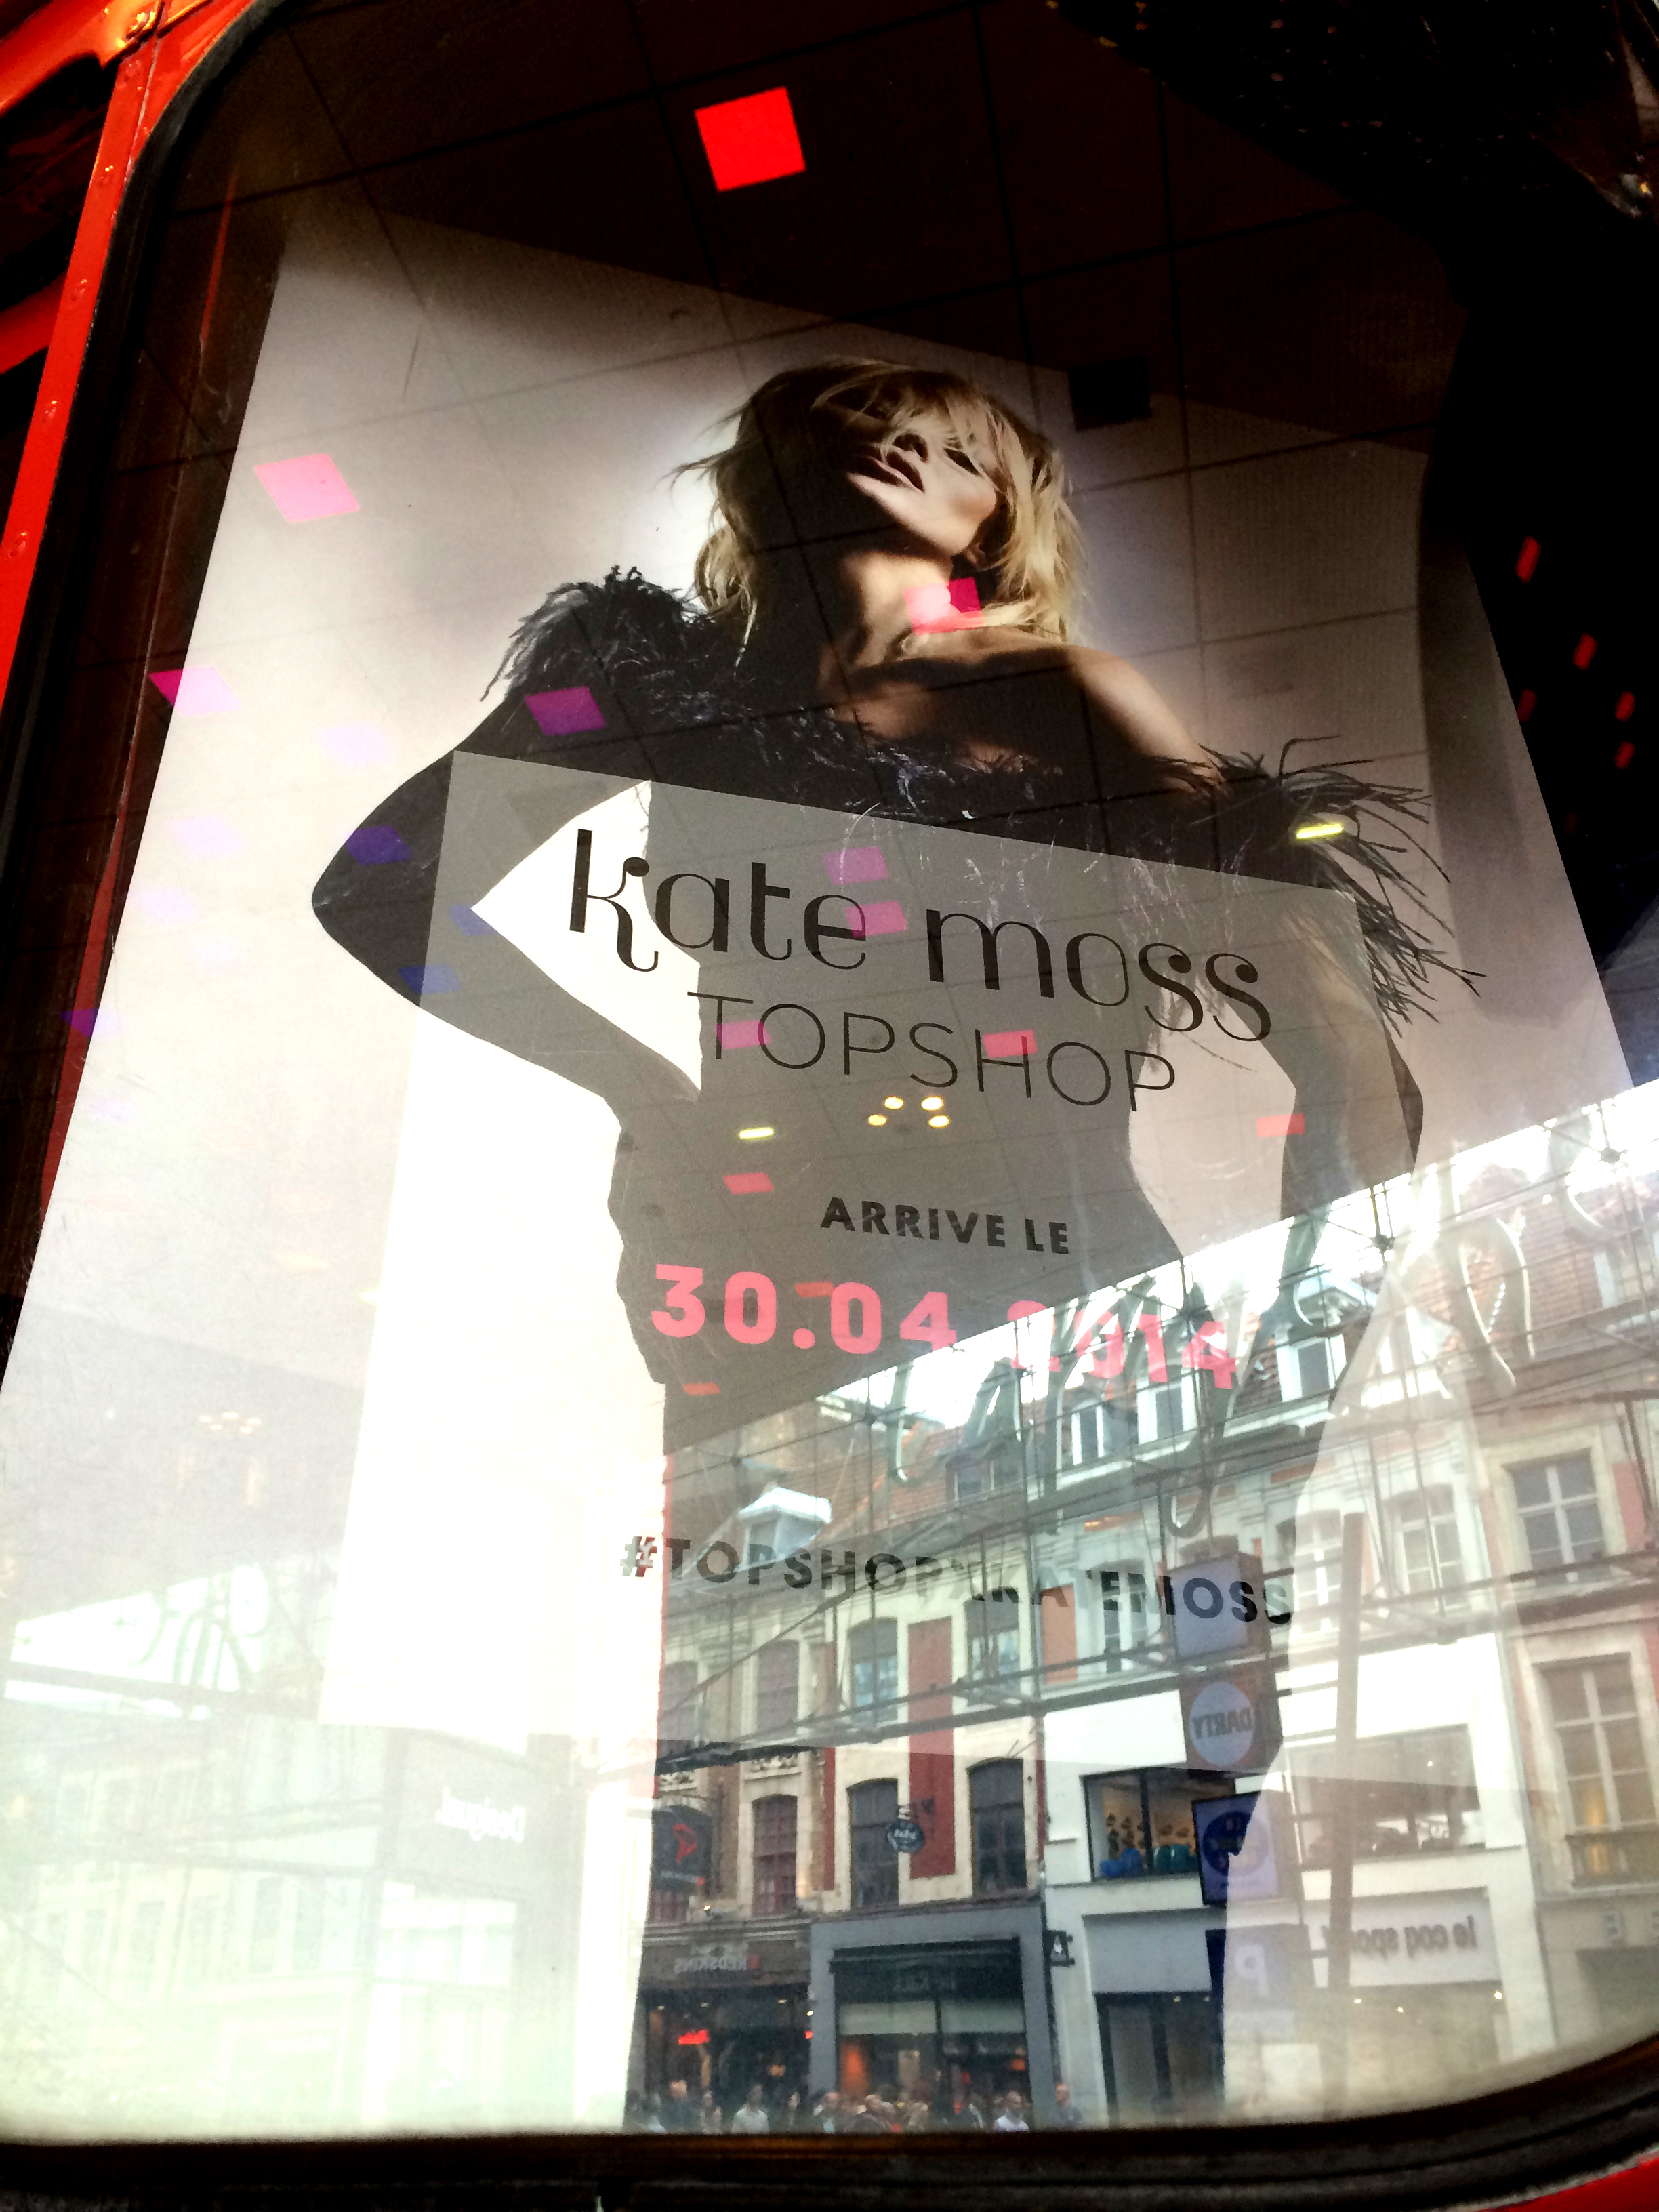 The Red Bus - Kate Moss - Topshop - Galeries Lafayette - Lille